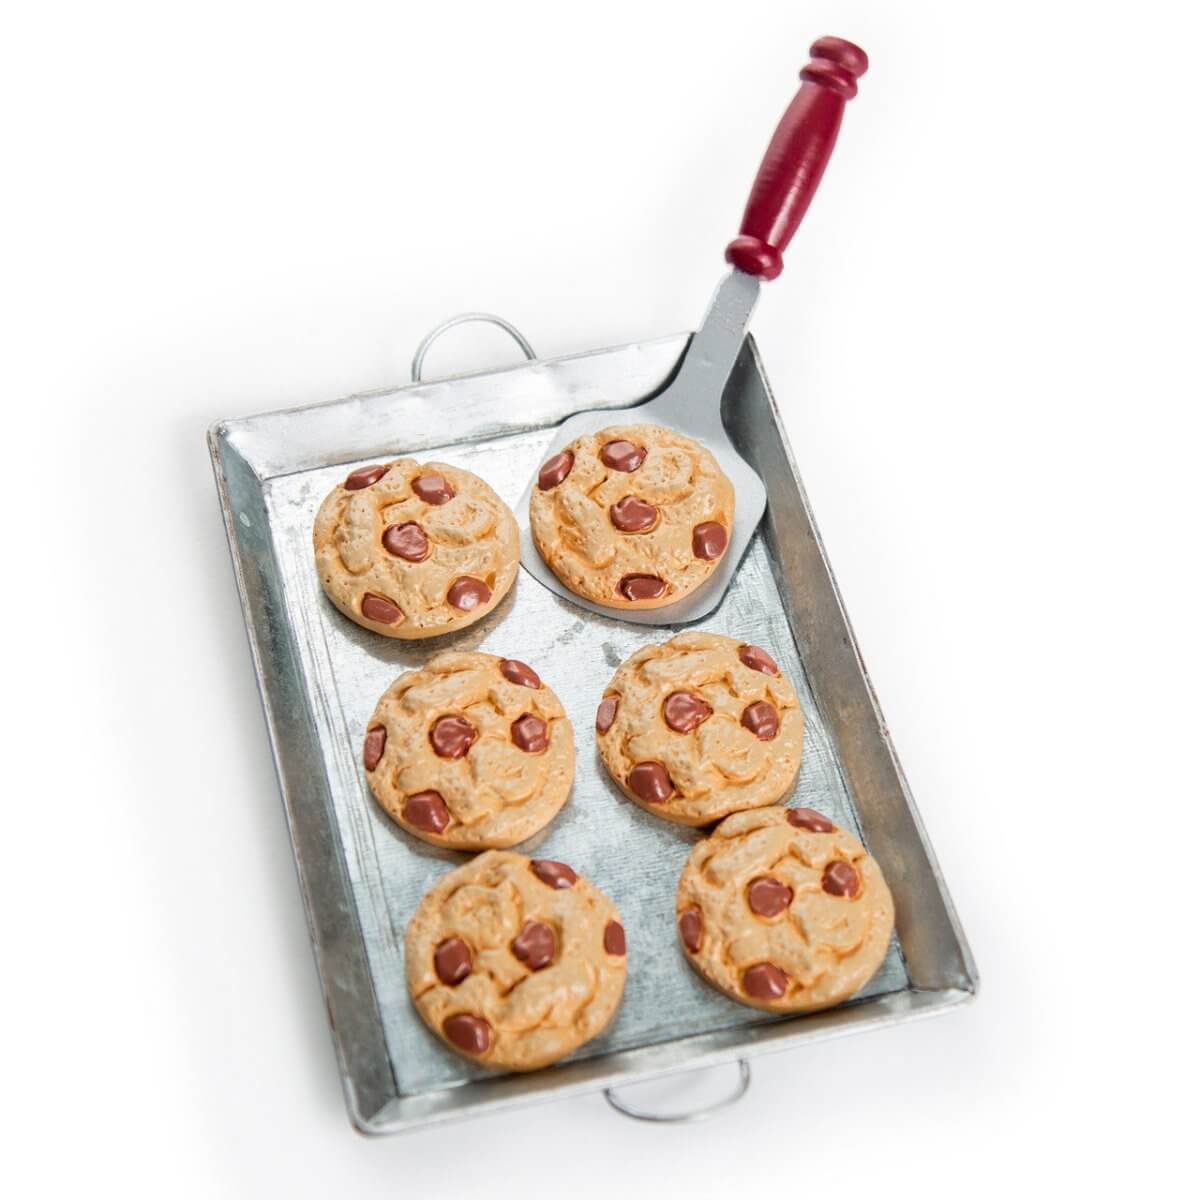 8 Piece Chocolate Chip Cookie Baking Set Accessory For 18 Inch Dolls - Simon's Collectibles